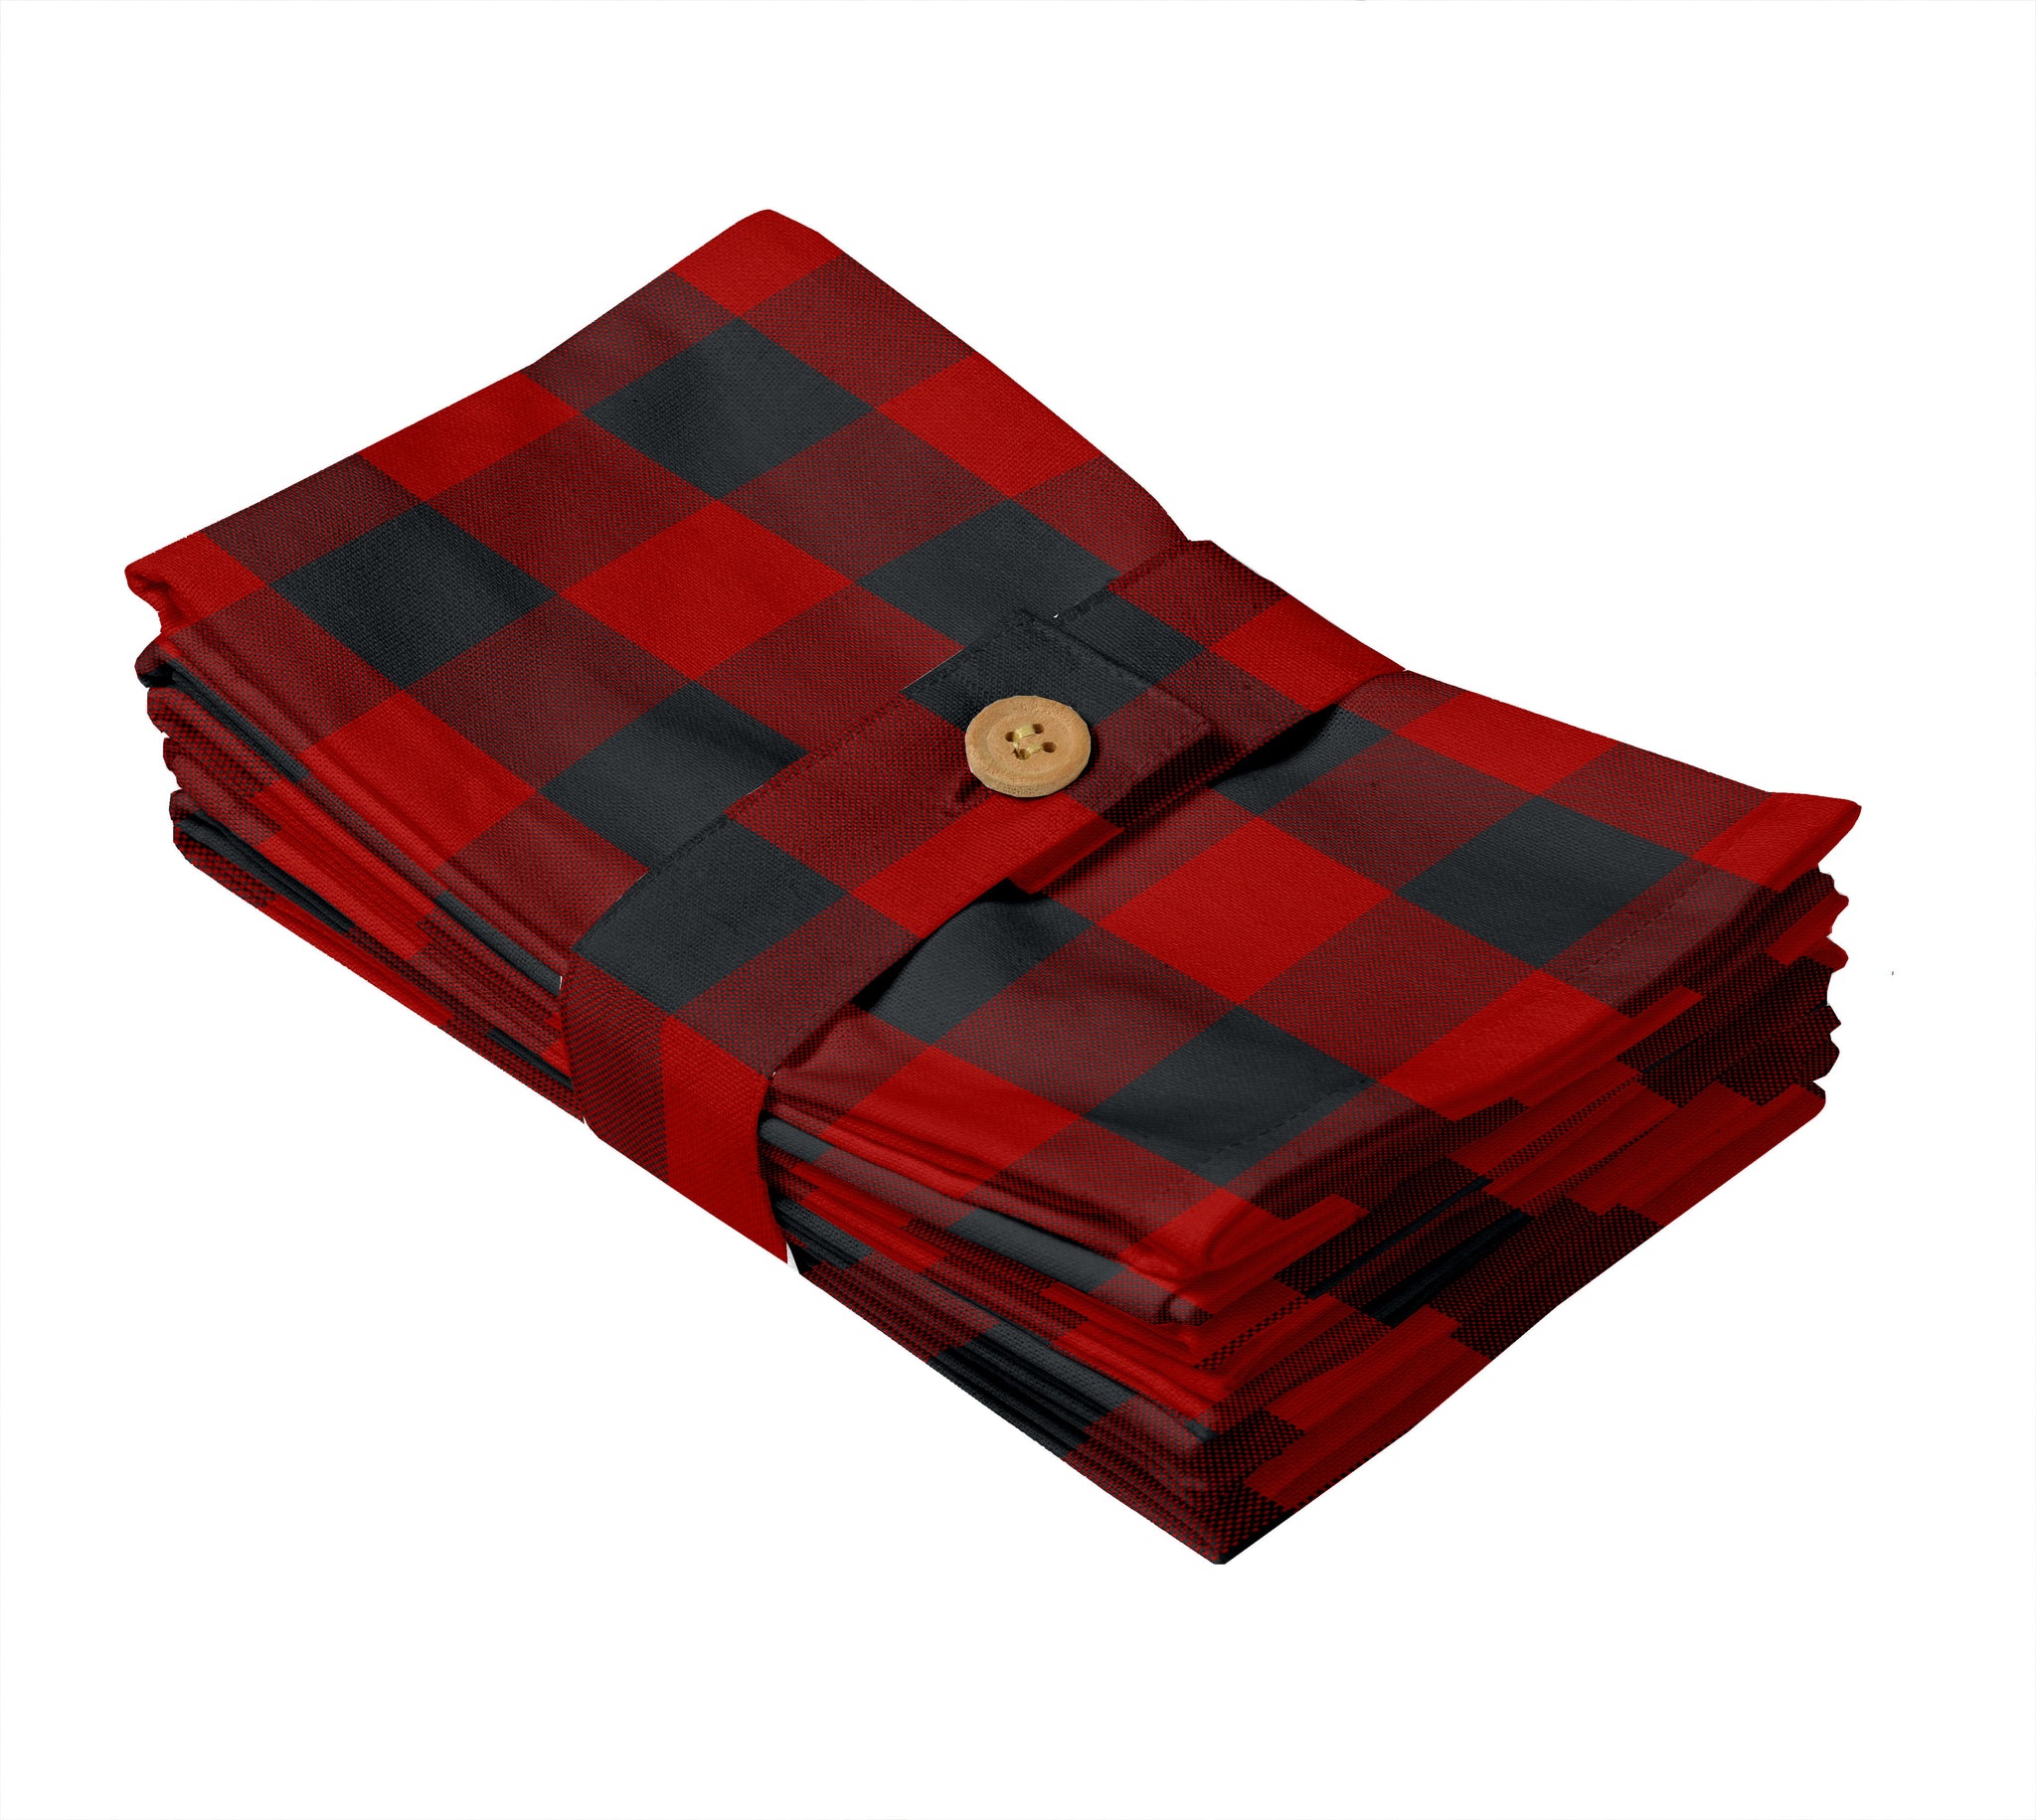 Lushomes Buffalo Checks Red & Black Plaid Dinning Kitchen Napkins with Cloth Belt (Pack of 6, 20 x 20 inch)